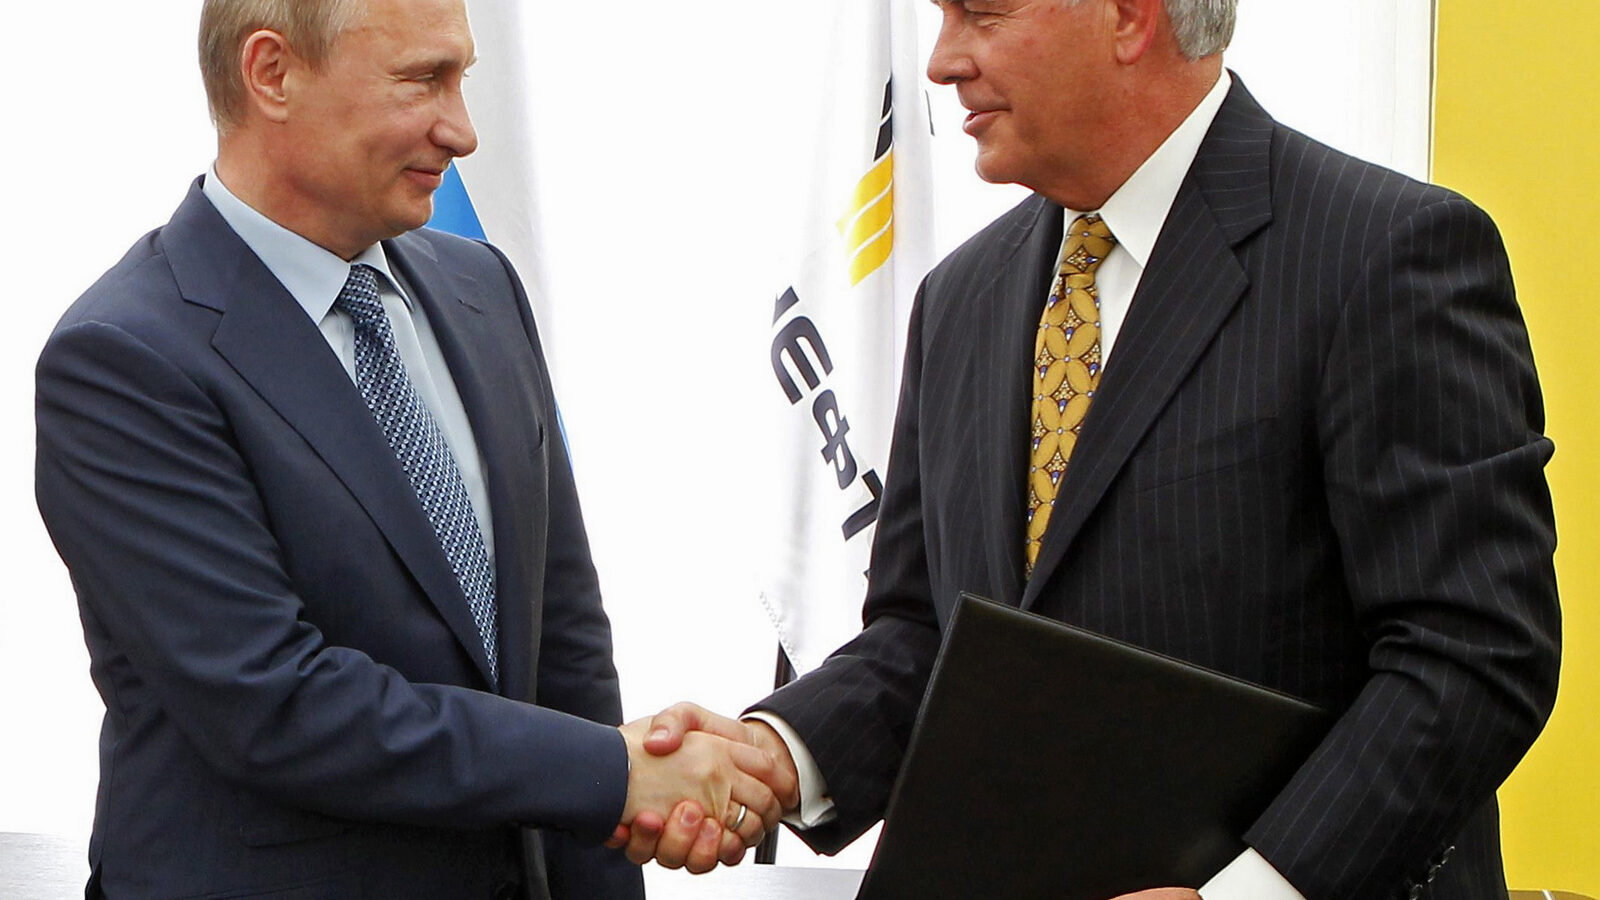 Russian President Vladimir Putin, left, and Exxon Mobil Corp. CEO Rex Tillerson shake hands at a signing ceremony of an agreement between state-controlled Russian oil company Rosneft and Exxon Mobil corporation at the Black Sea port of Tuapse, southern Russia, Friday, June 15, 2012. (AP Photo/RIA-Novosti, Mikhail Klimentyev, Presidential Press Service)